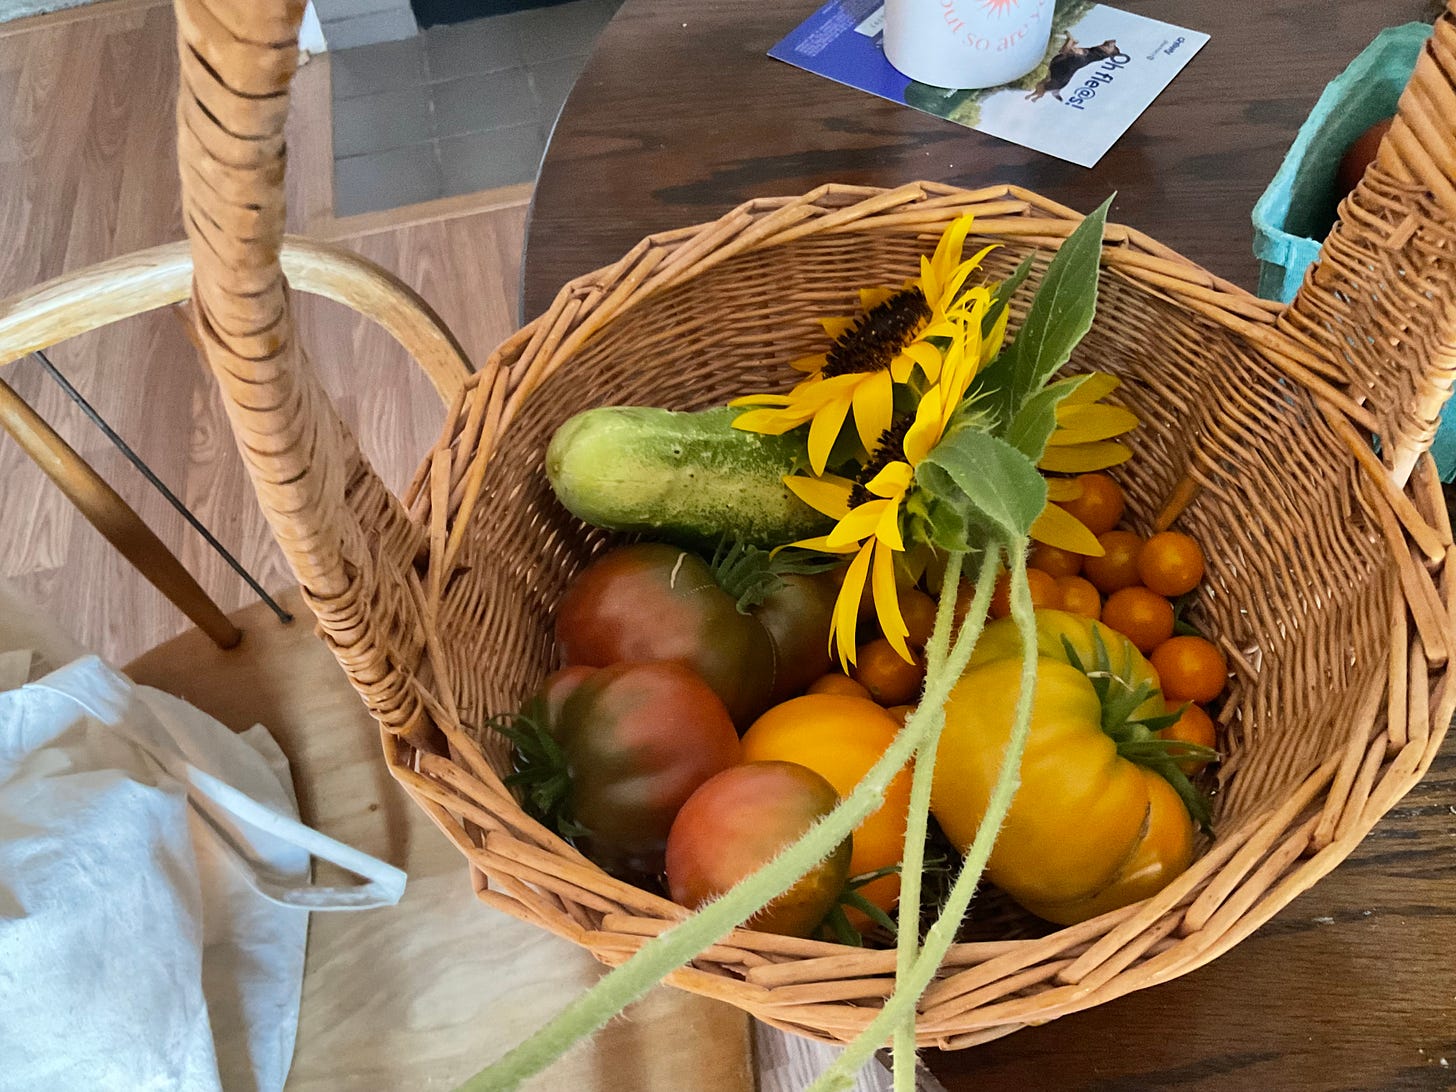 A wicker basket holds a cucumber, some various colors and sizes of tomato’s, and two sunflowers